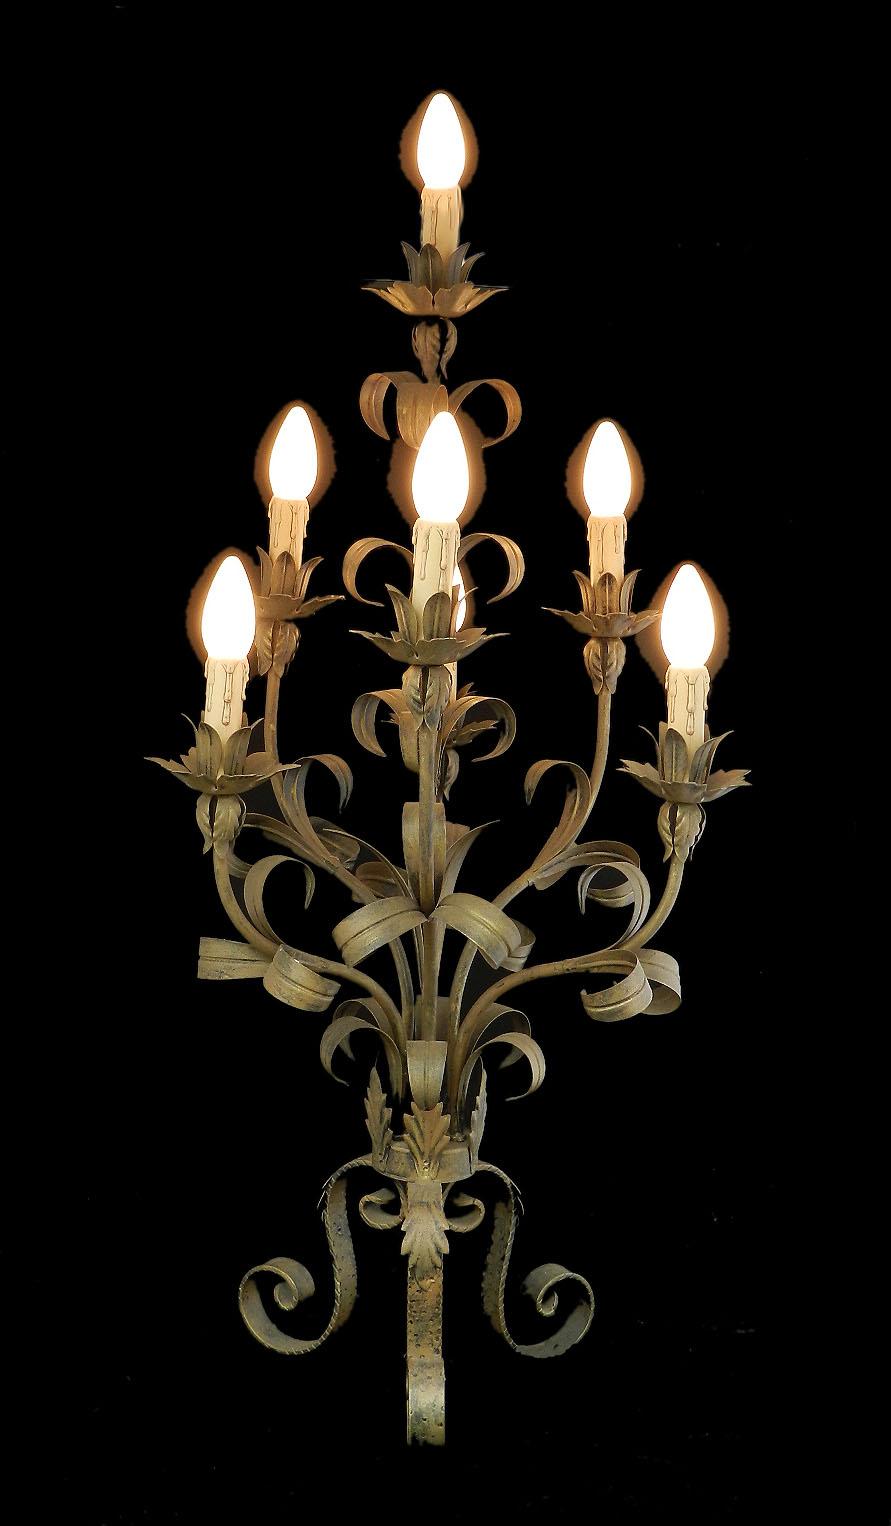 Floral toleware table lamp French vintage circa 1970
7 light branches
Tole gilt metal with original patinated old gold finish
Superb when lit
Hollywood Regency 
Solid gilded base 24cms diameter
Very good vintage condition with only minor signs of